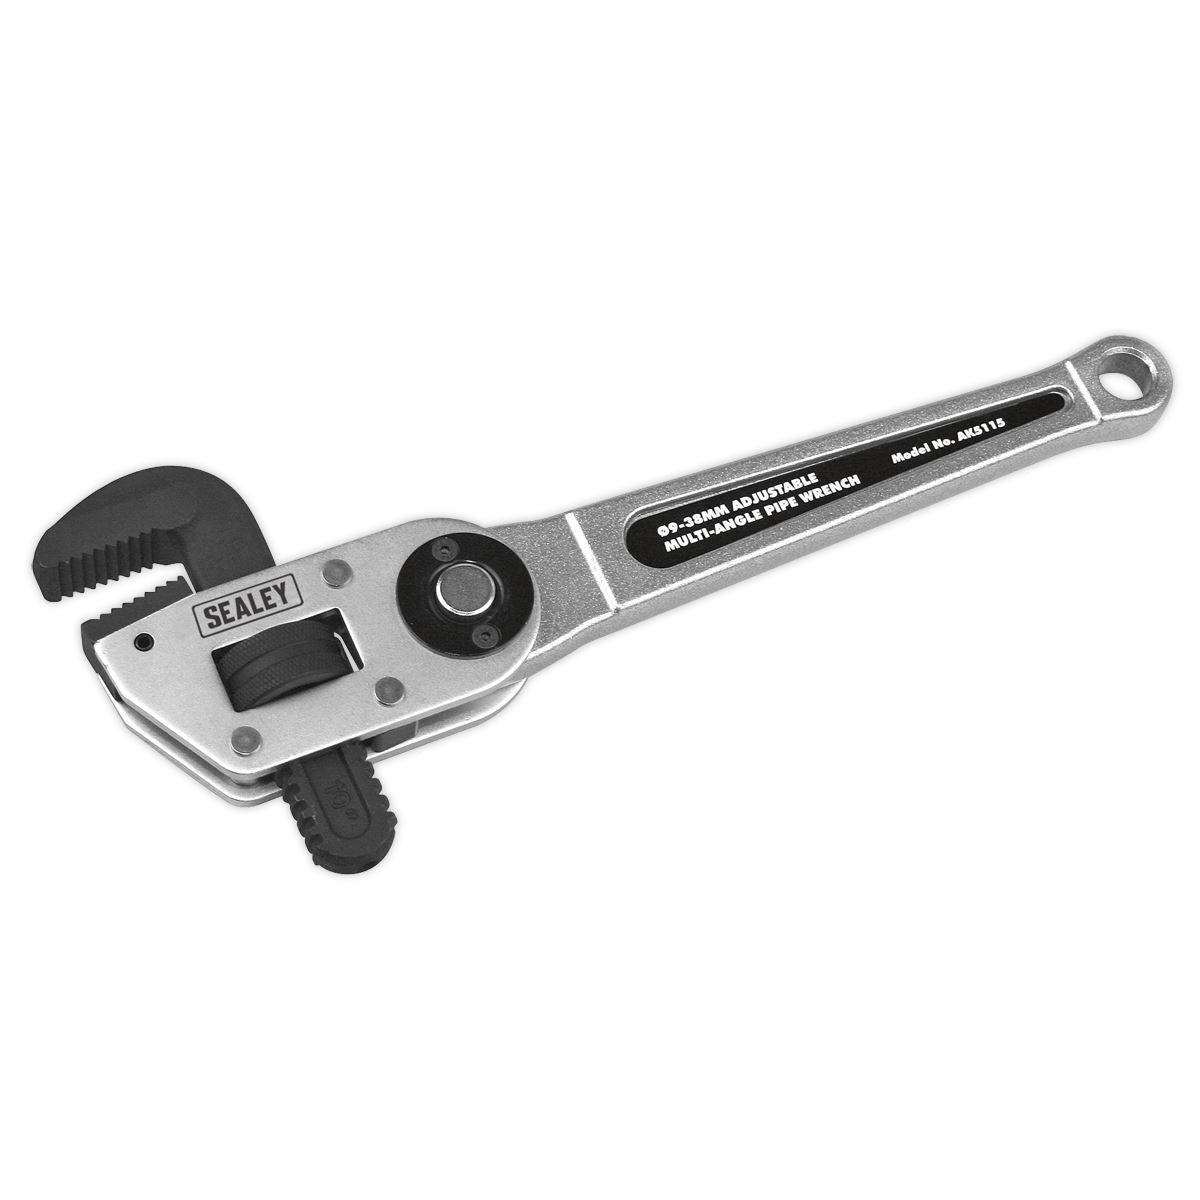 Sealey Premier Adjustable Multi-Angle Pipe Wrench Ø9-38mm